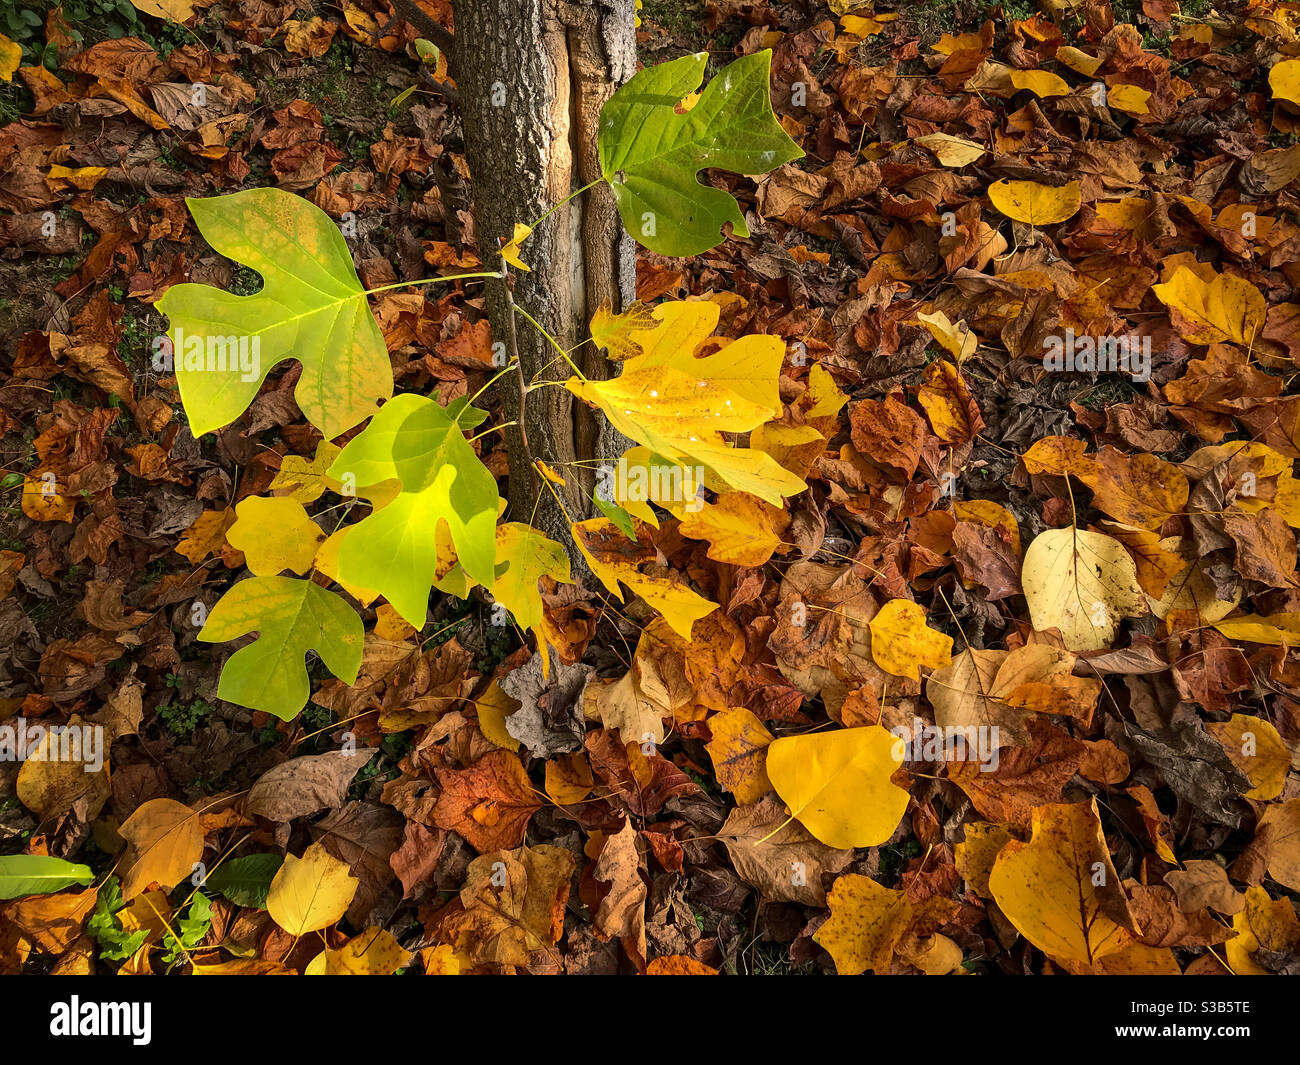 carpet si dry fallen leaves in autumn under tulip tree trunk with branches with green and yellow leaves Stock Photo